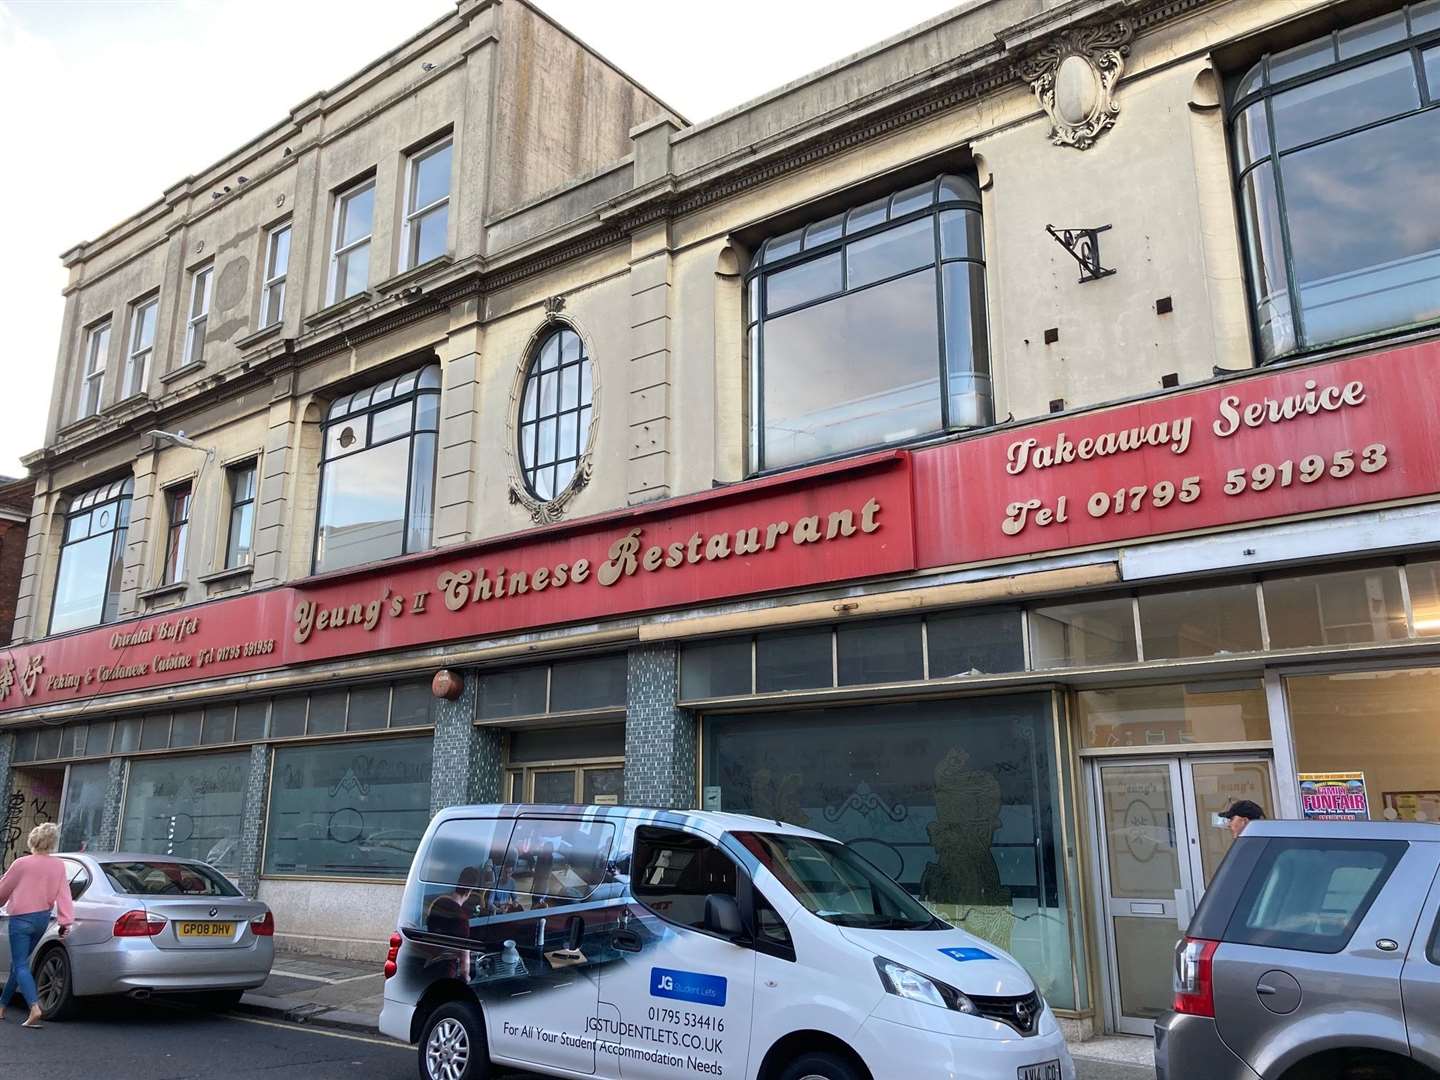 The former Chinese restaurant has long stood empty